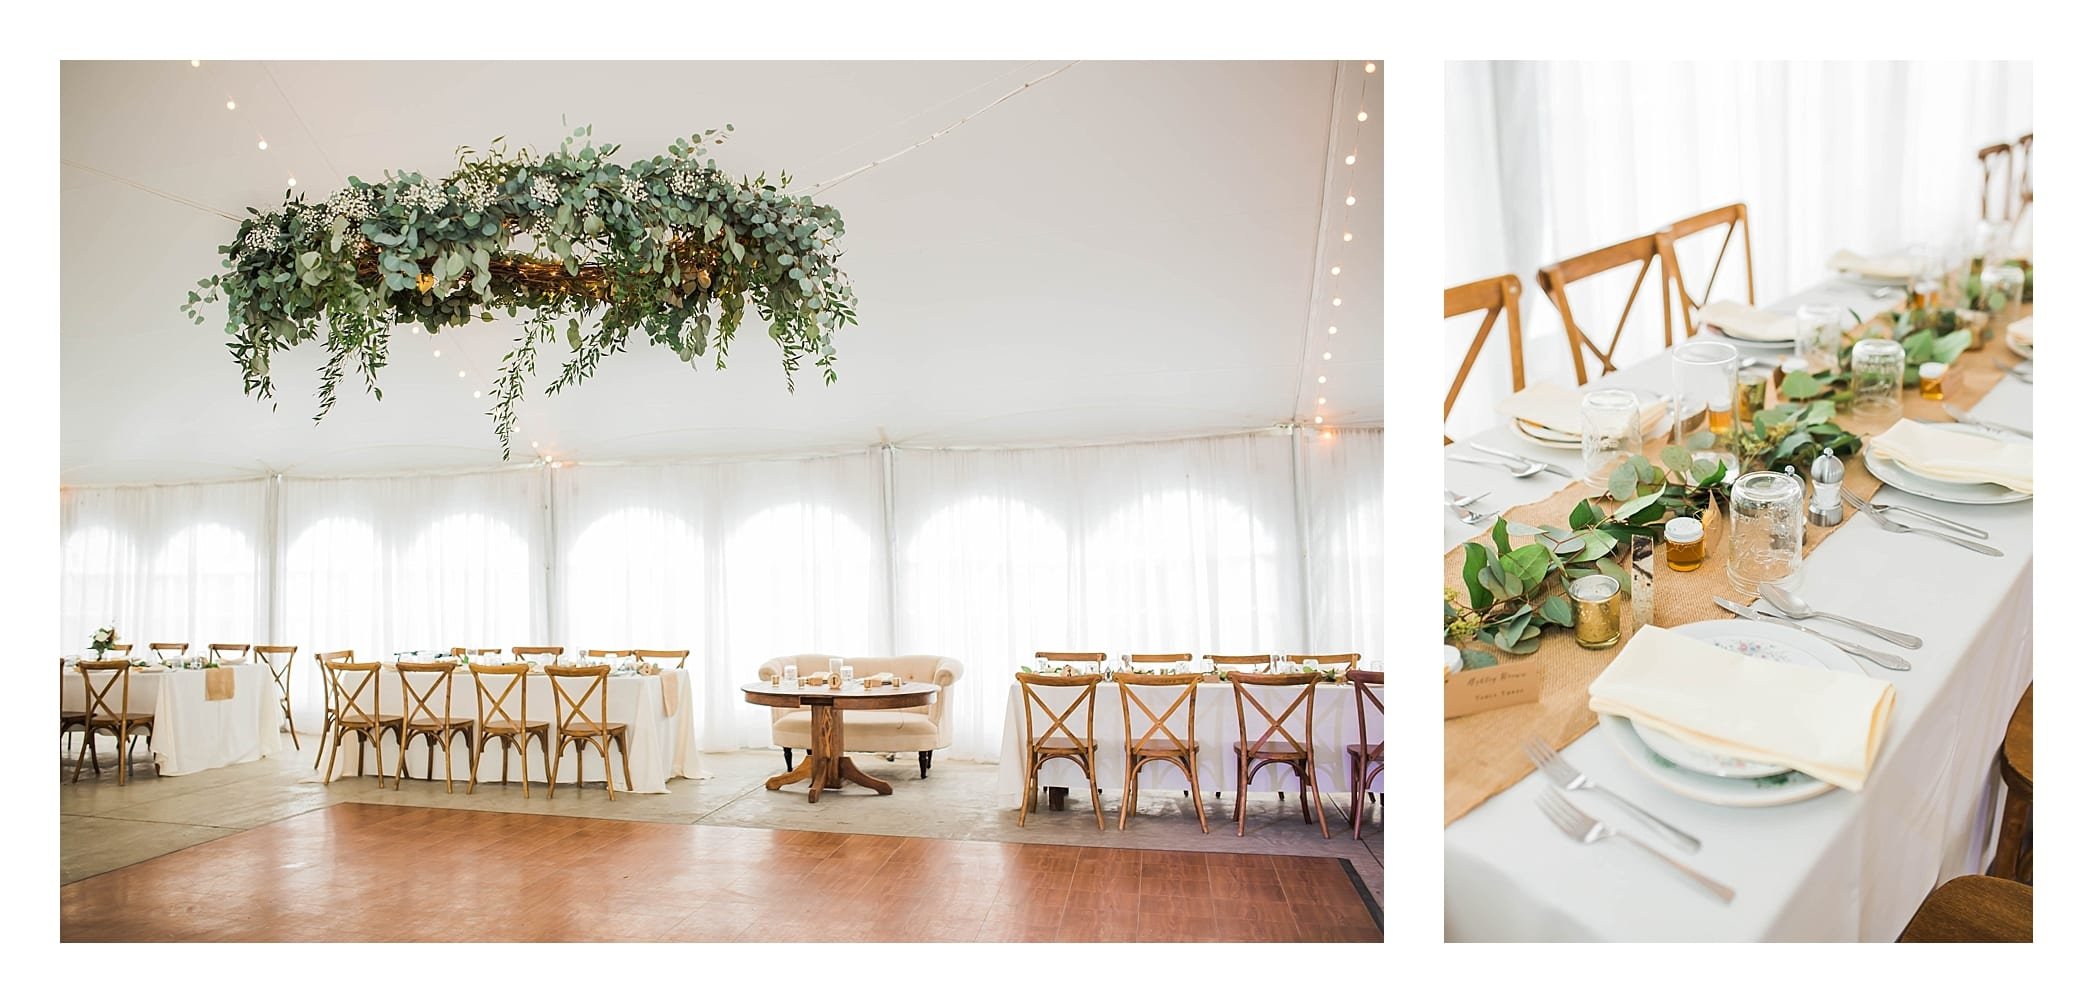 interior decor at a tented reception at Heritage Prairie Farm